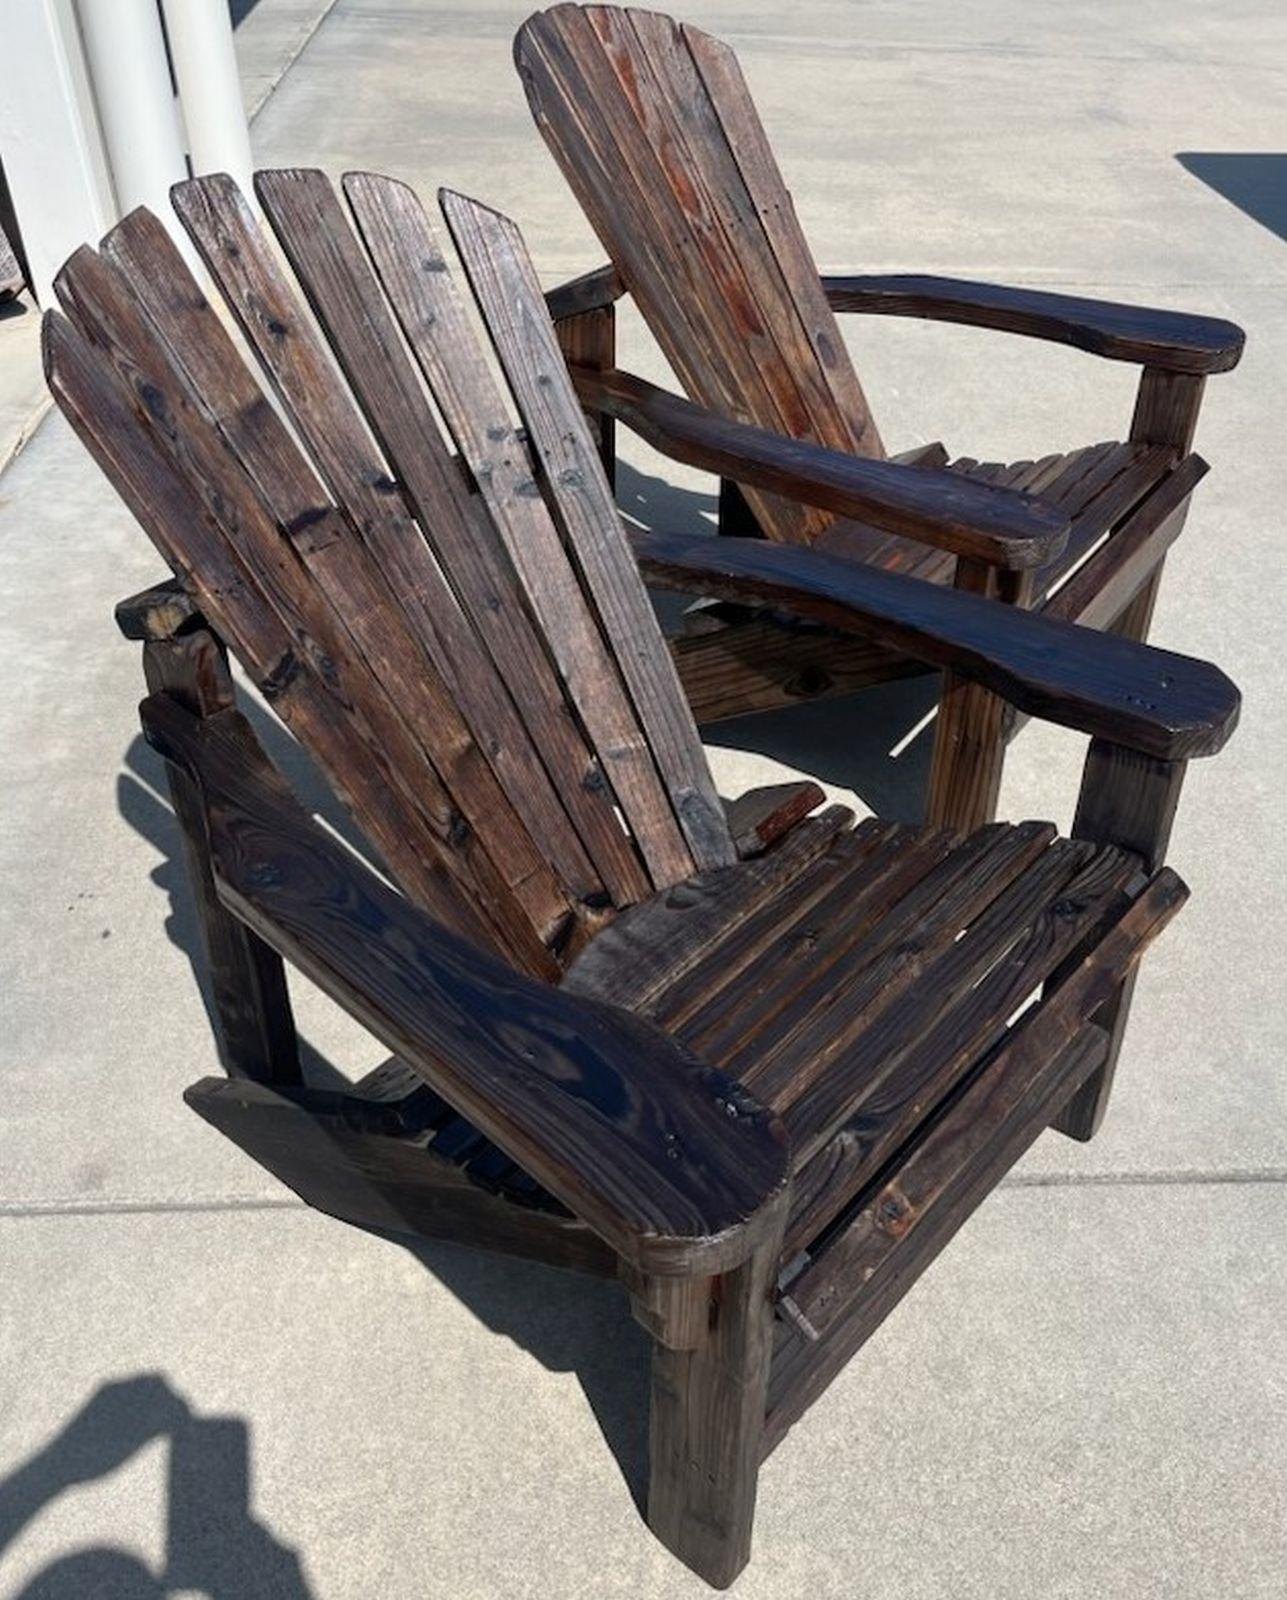 Adirondack high back chairs wonderful pair of lounge chairs. very comfortable and very strong and sturdy pair. This set has been cleaned up a bit and professionally tightened for strength and stability along with a wonderful top coat of wax. Such a